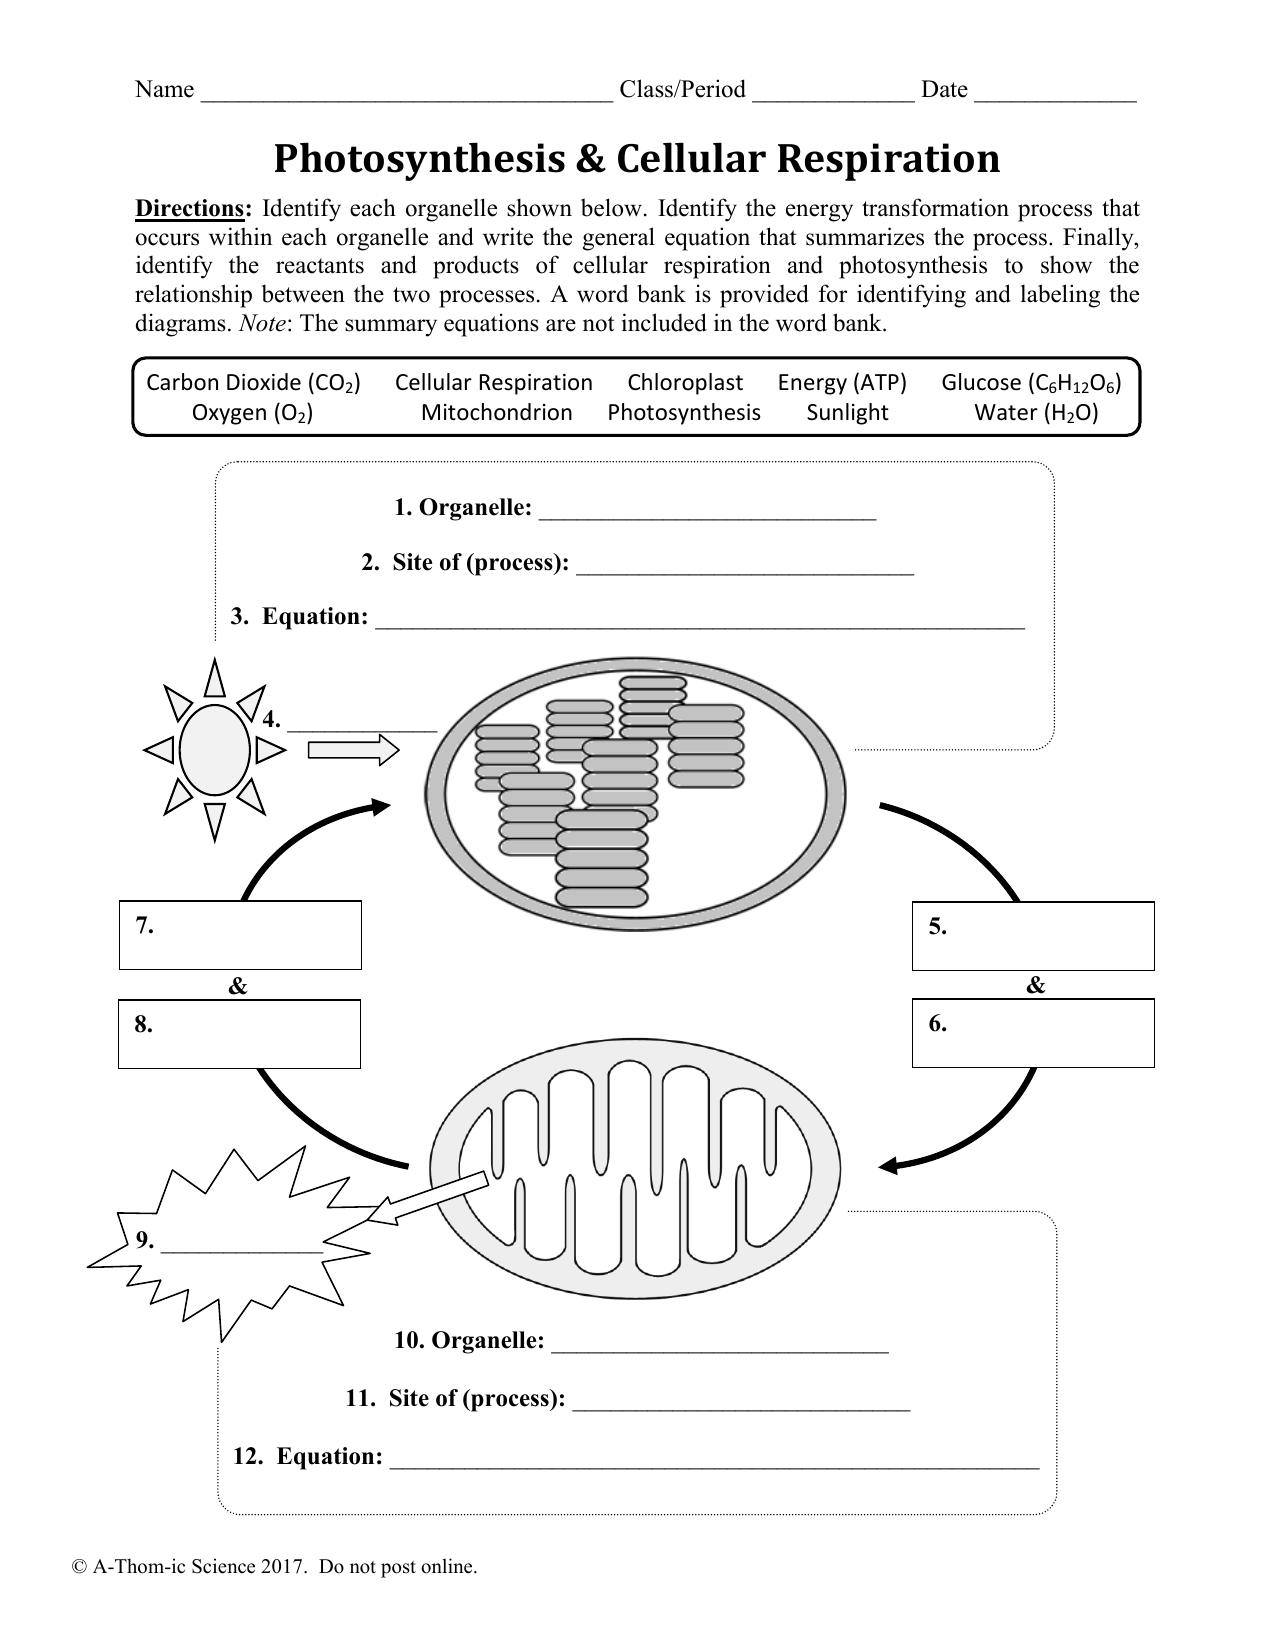 photosynthesis-and-respiration-worksheet-answers